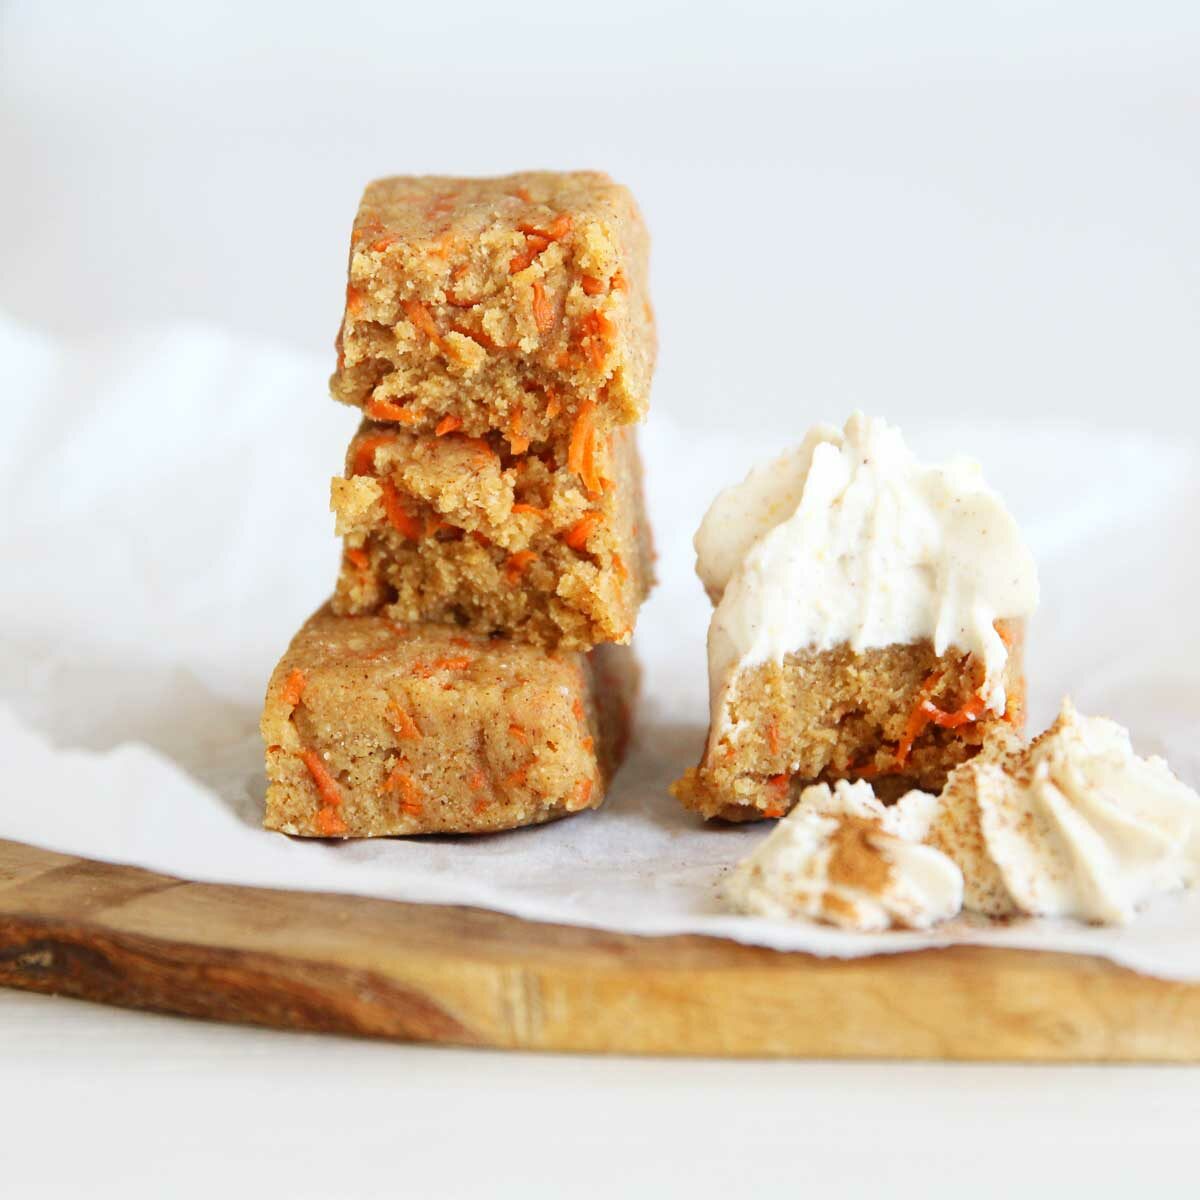 No-Bake Carrot Cake Protein Bars Recipe with Collagen Peptides - Carrot Cake Protein Bars